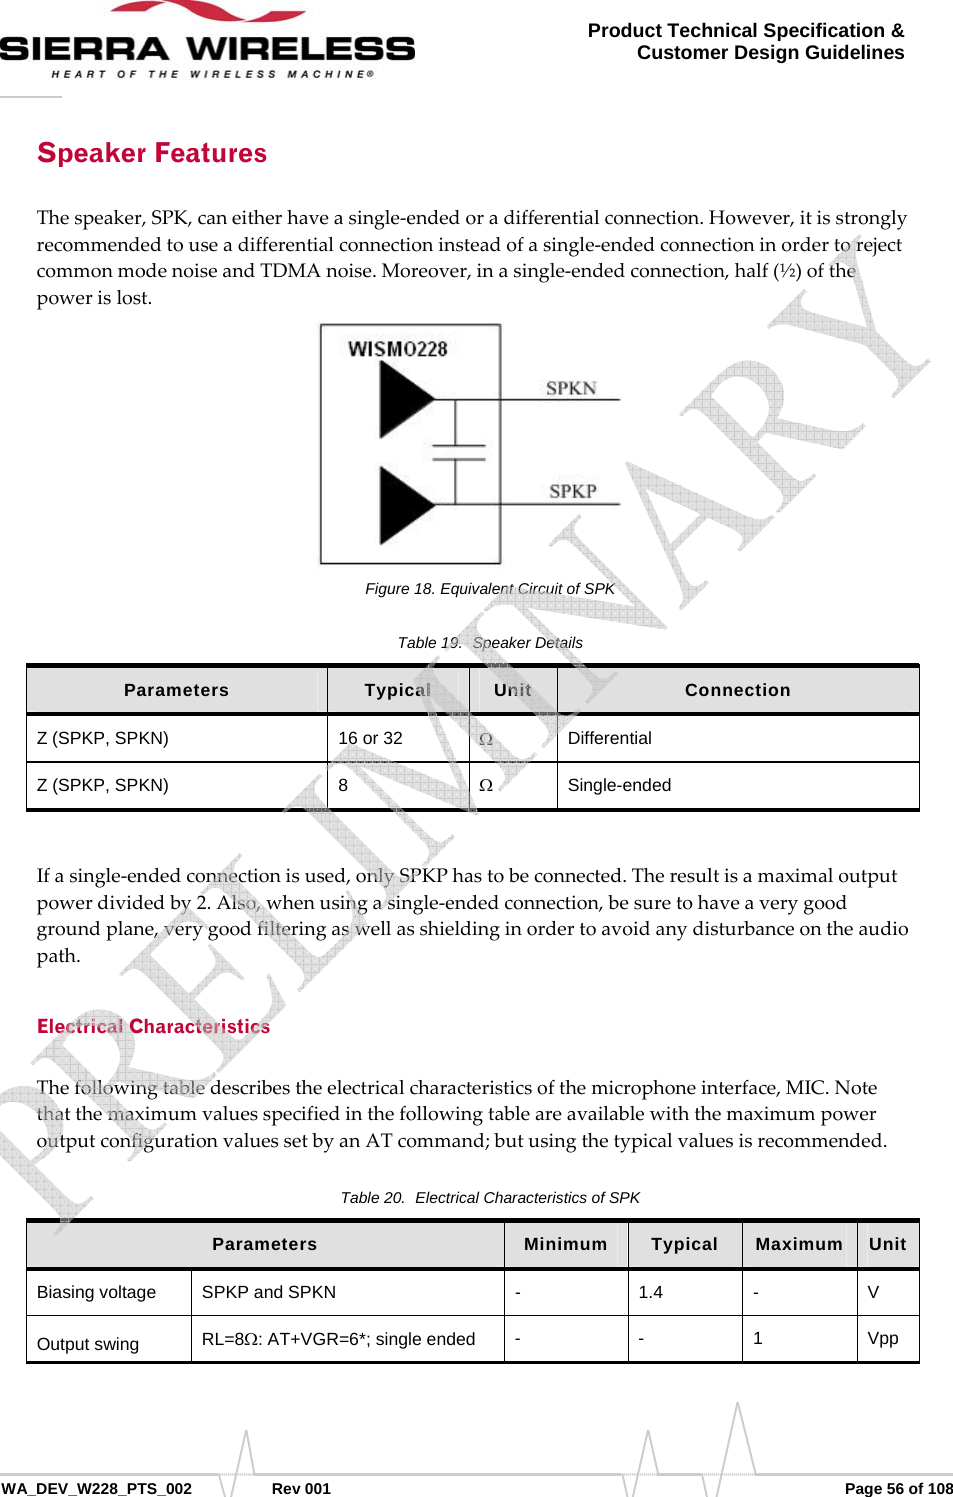      WA_DEV_W228_PTS_002 Rev 001  Page 56 of 108 Product Technical Specification &amp; Customer Design Guidelines Speaker Features Thespeaker,SPK,caneitherhaveasingle‐endedoradifferentialconnection.However,itisstronglyrecommendedtouseadifferentialconnectioninsteadofasingle‐endedconnectioninordertorejectcommonmodenoiseandTDMAnoise.Moreover,inasingle‐endedconnection,half(½)ofthepowerislost.Figure 18. Equivalent Circuit of SPK Table 19.  Speaker Details Parameters  Typical  Unit  Connection Z (SPKP, SPKN)  16 or 32  Ω Differential Z (SPKP, SPKN)  8  Ω Single-ended Ifasingle‐endedconnectionisused,onlySPKPhastobeconnected.Theresultisamaximaloutputpowerdividedby2.Also,whenusingasingle‐endedconnection,besuretohaveaverygoodgroundplane,verygoodfilteringaswellasshieldinginordertoavoidanydisturbanceontheaudiopath.Electrical Characteristics Thefollowingtabledescribestheelectricalcharacteristicsofthemicrophoneinterface,MIC.NotethatthemaximumvaluesspecifiedinthefollowingtableareavailablewiththemaximumpoweroutputconfigurationvaluessetbyanATcommand;butusingthetypicalvaluesisrecommended.Table 20.  Electrical Characteristics of SPK Parameters  Minimum  Typical  Maximum  Unit Biasing voltage  SPKP and SPKN  -  1.4  -  V Output swing  RL=8Ω: AT+VGR=6*; single ended  - - 1 Vpp    